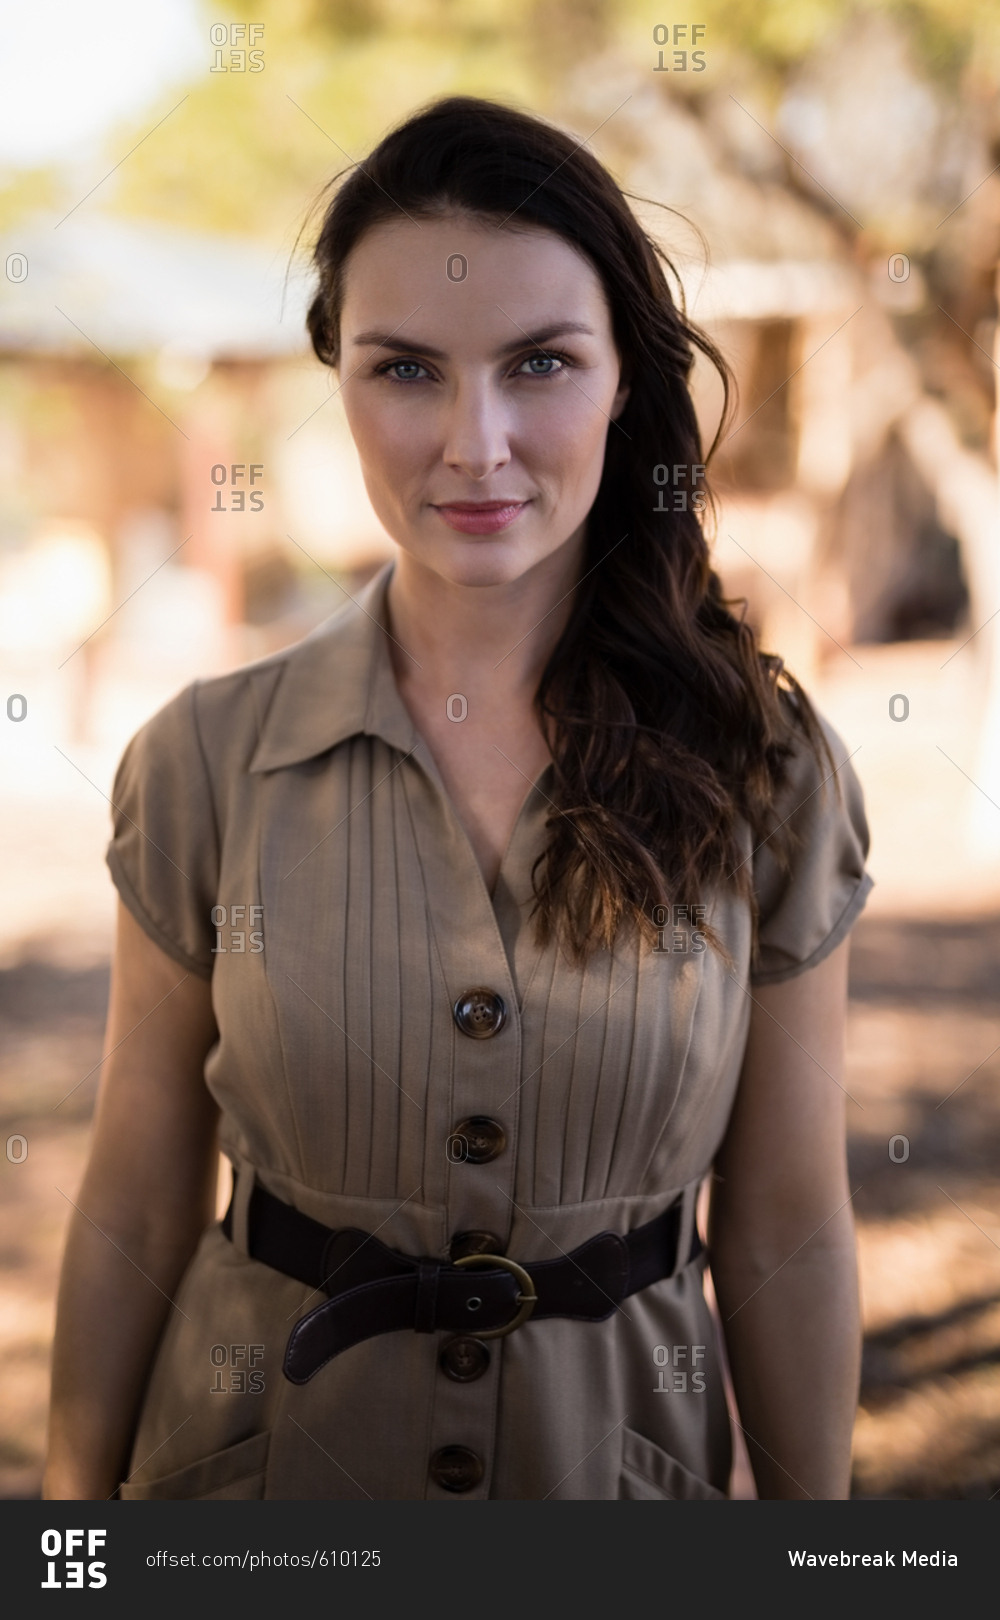 Portrait of smiling woman during safari vacation